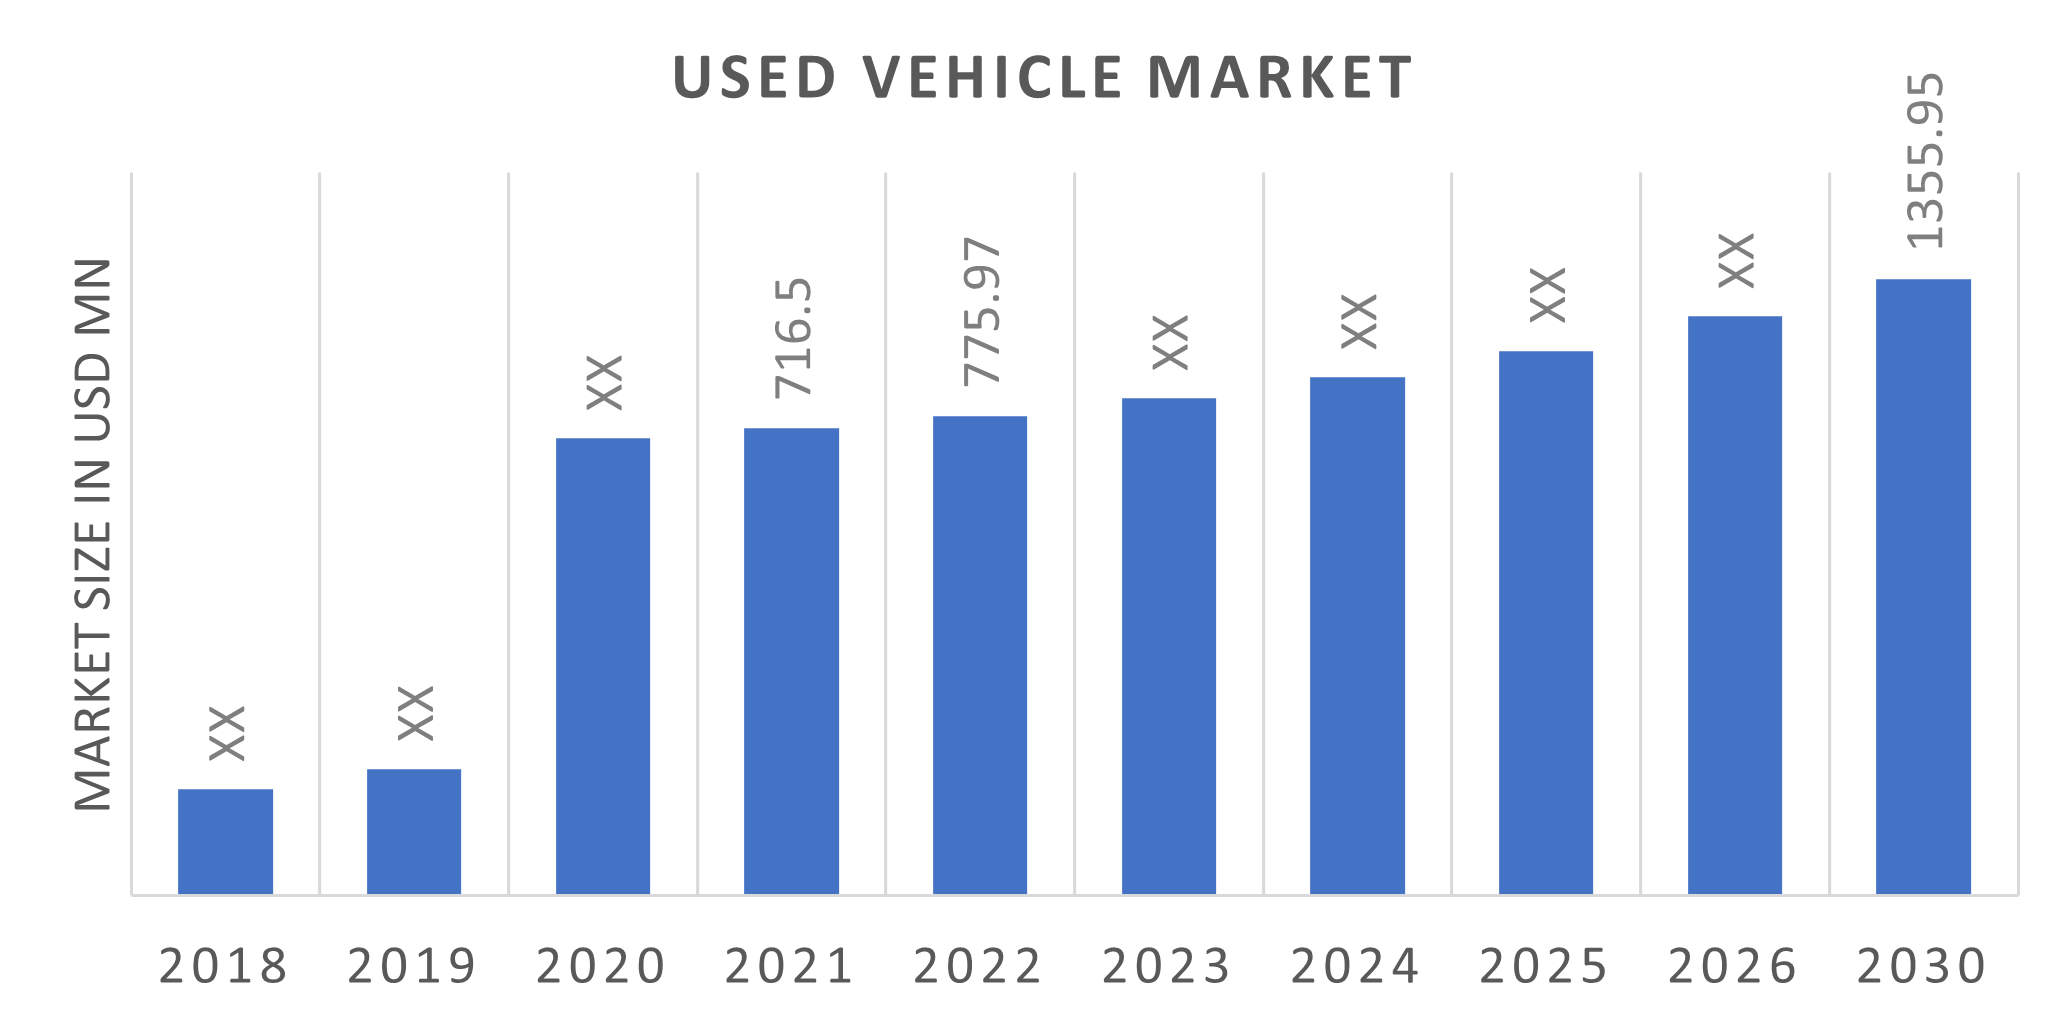 Used Vehicle Market Overview